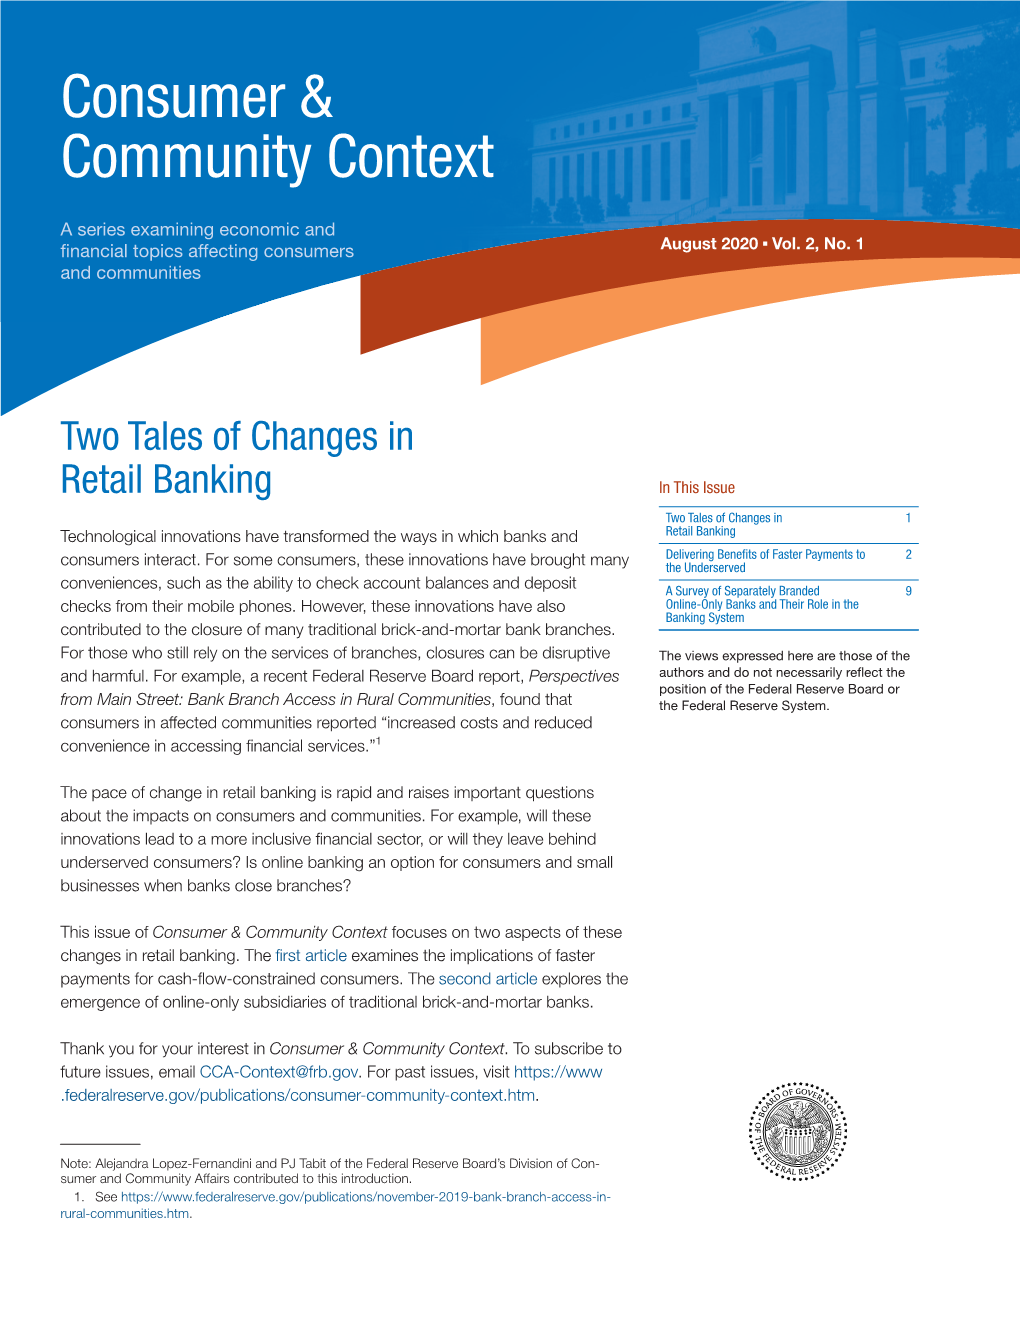 Consumer and Community Context, August 2020